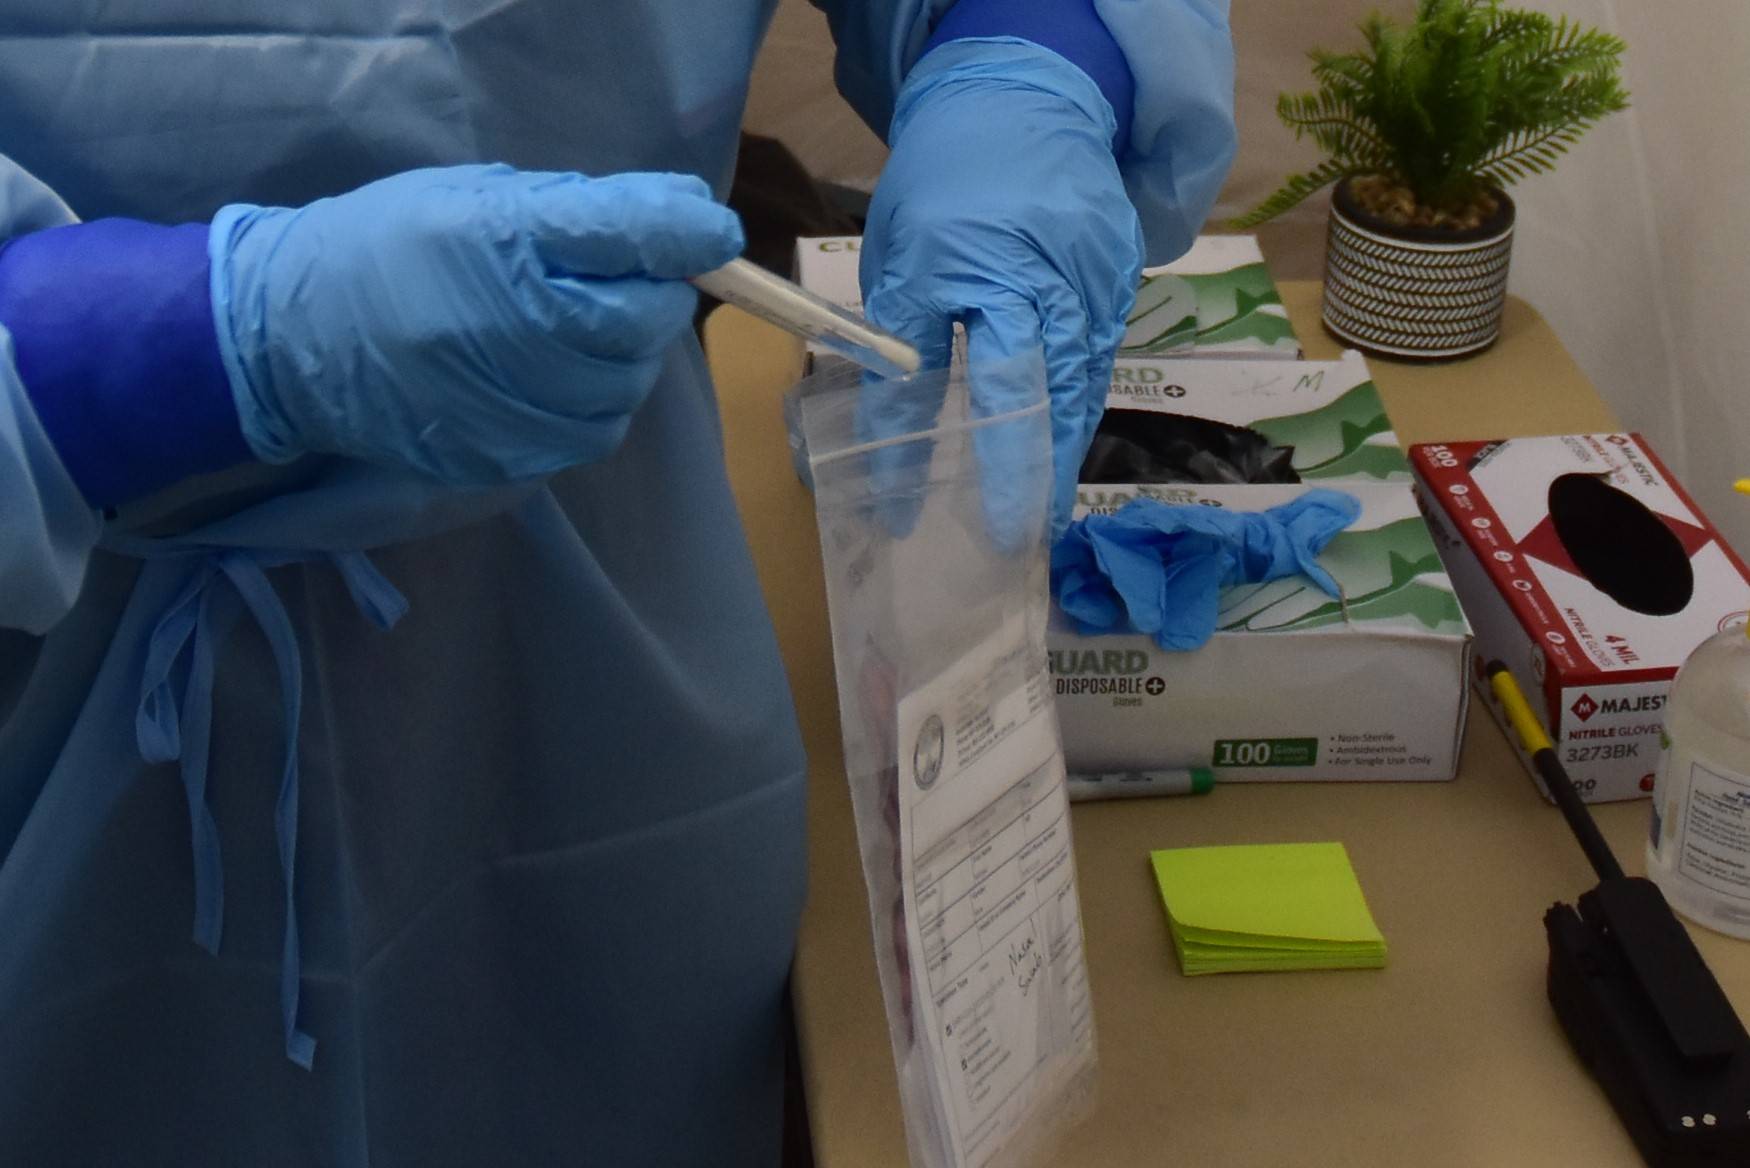 Emergency worker Melanie Chavez takes a COVID-19 test sample at the Juneau International Airport screening site on Monday, Oct. 12, 2020. City officials said Tuesday contact tracers are behind in tracking down positive COVID-19 cases. (Peter Segall / Juneau Empire)